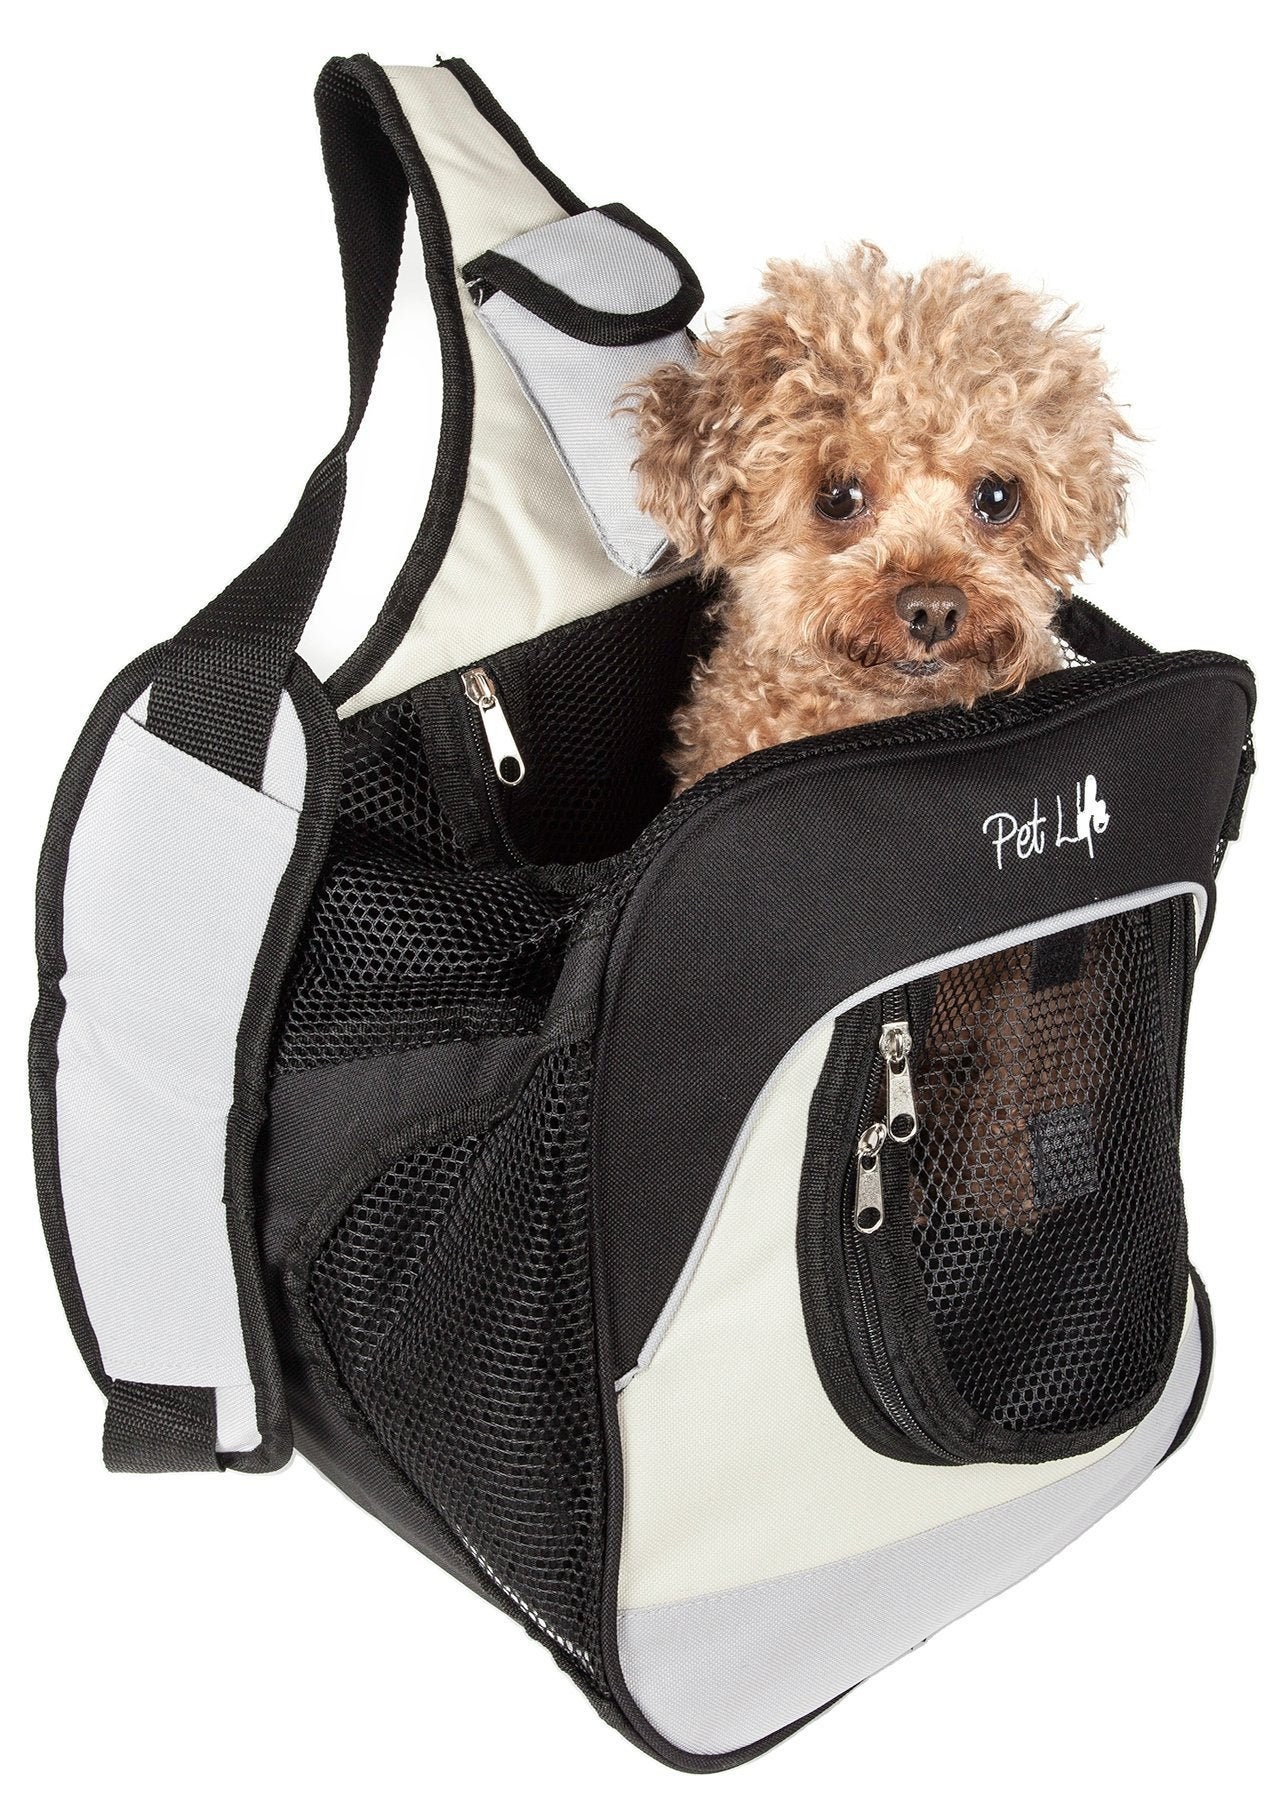 Bicyclestore Dog Travel Bag Washable Pet Food Carrier Storage Bags Cat  Treat Diaper Carrying Bag Accessories Equipment Sling Bag Organizer with  MultiFunction  China Pet Carrier and Designed Pet Carrier price 